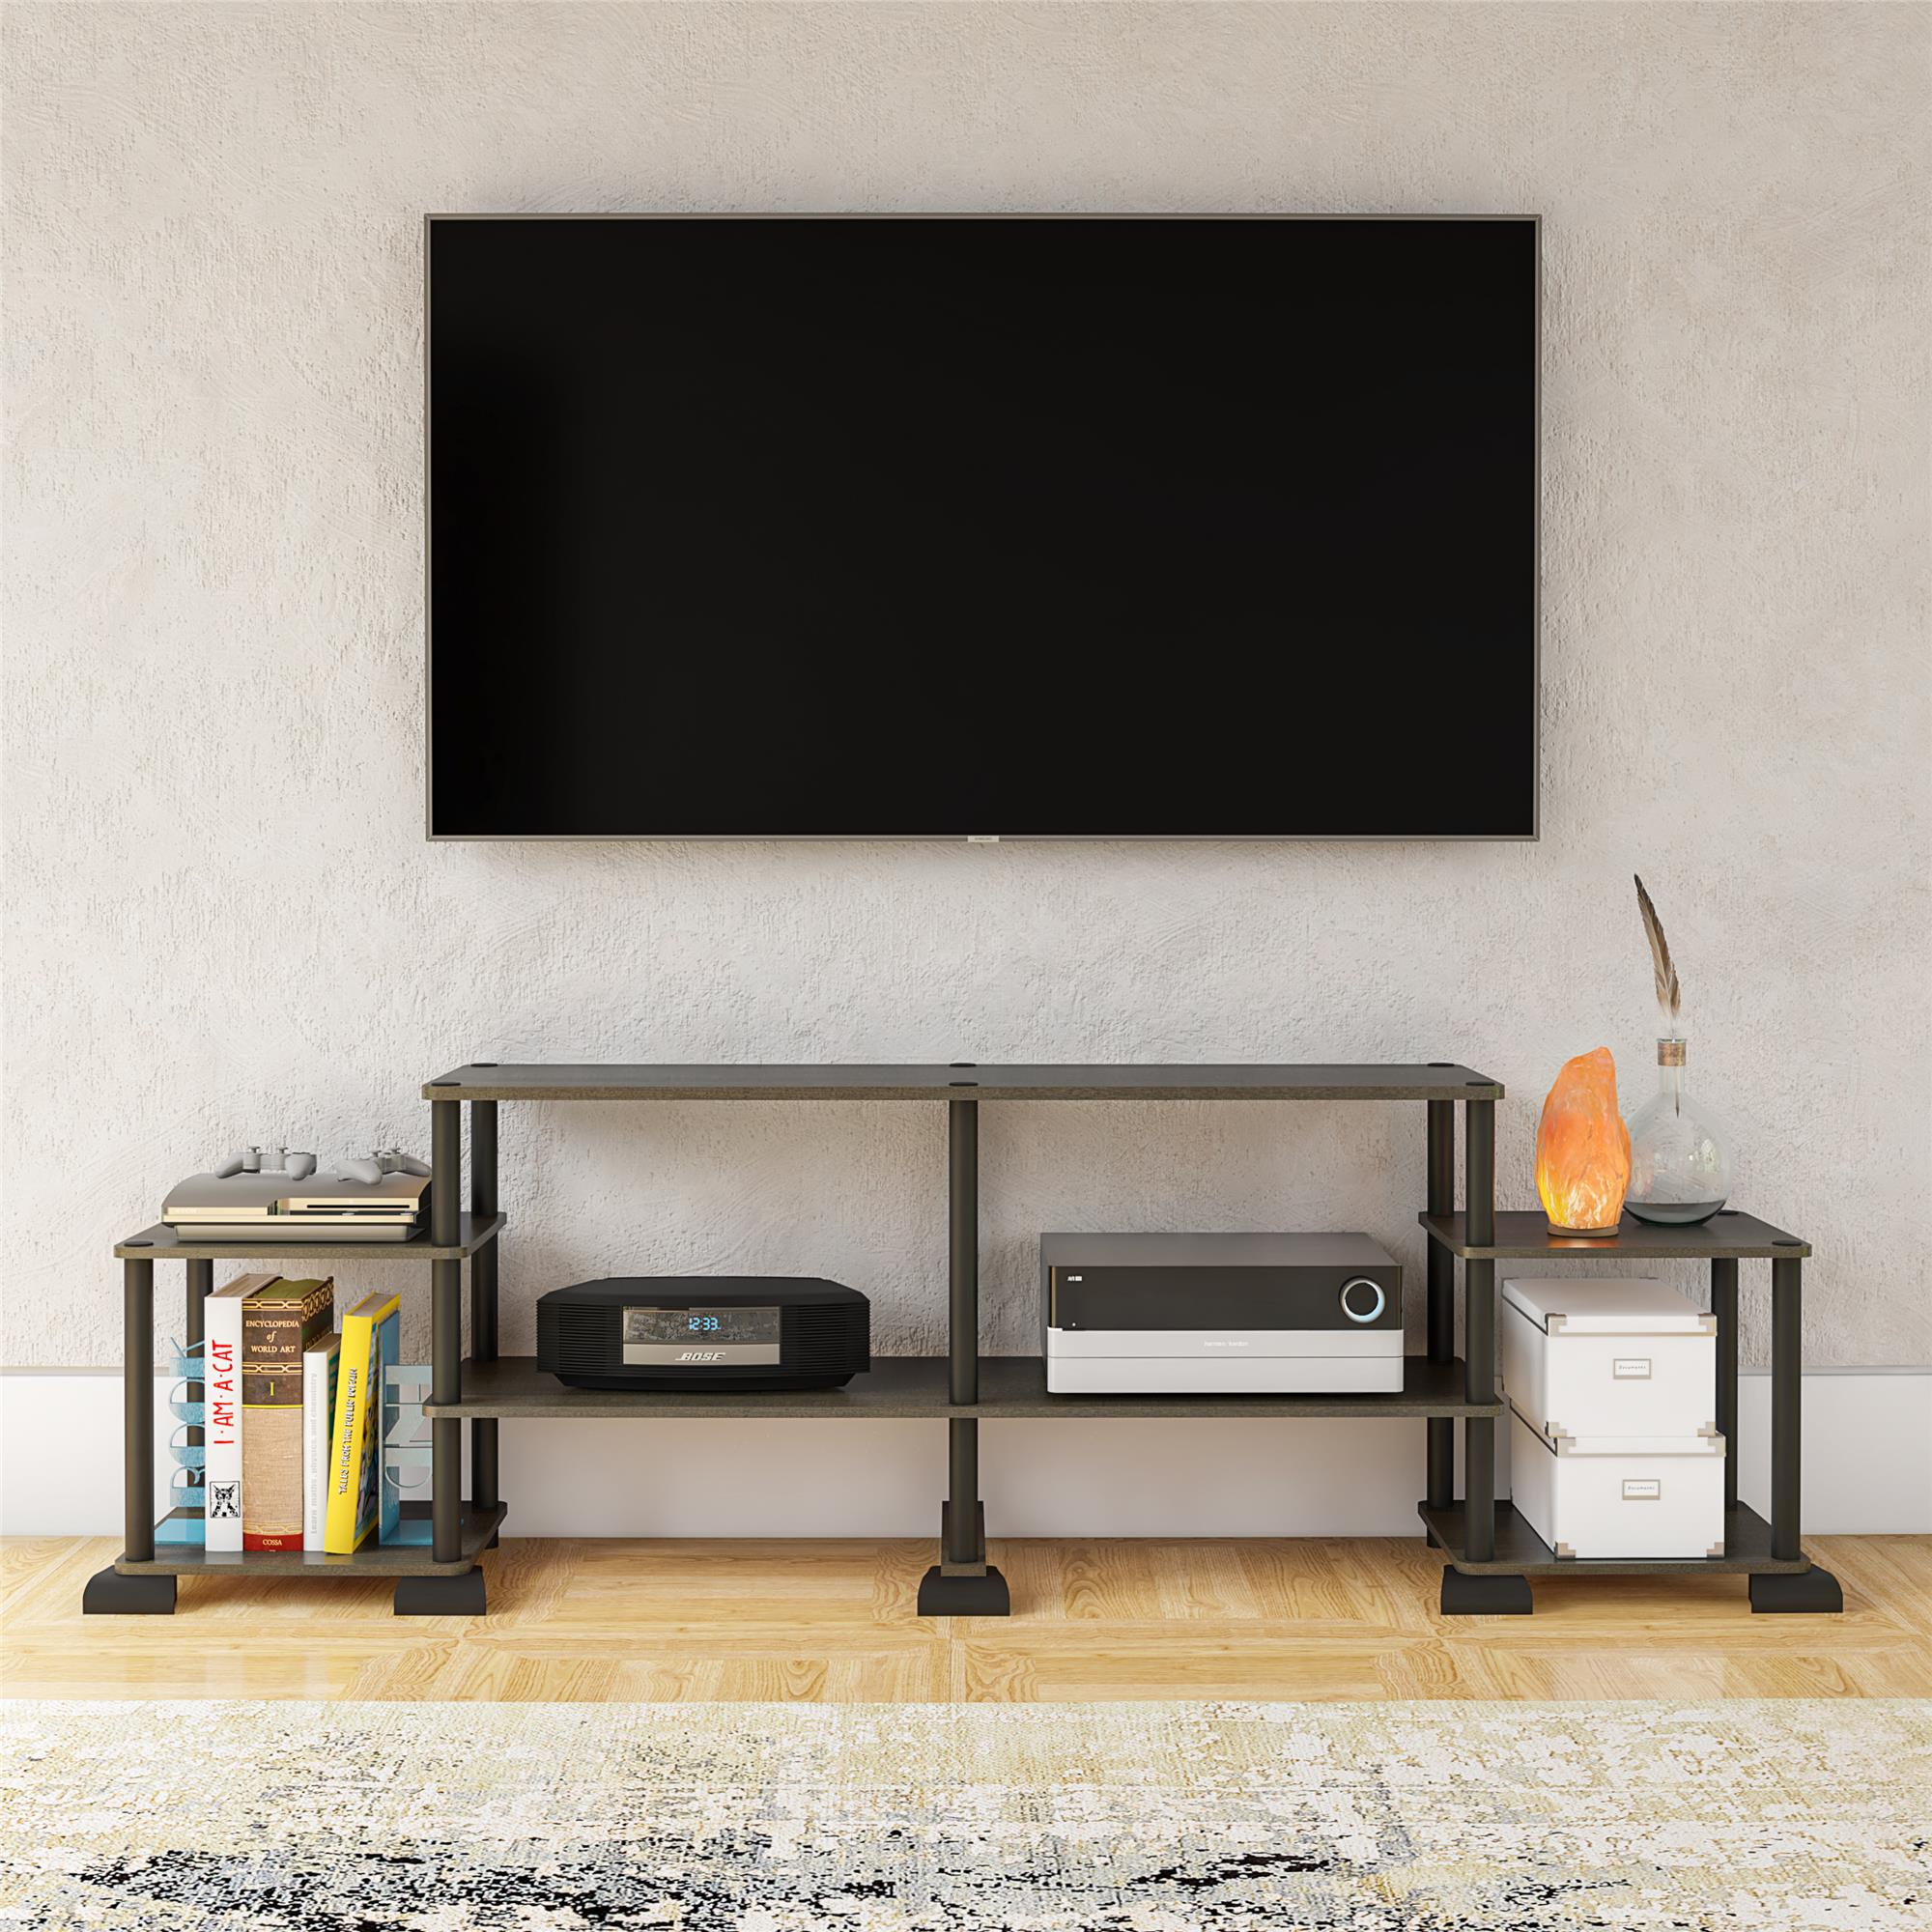 Ameriwood Home Glenridge Toolless TV Stand for TVs up to 50", Espresso - image 1 of 14